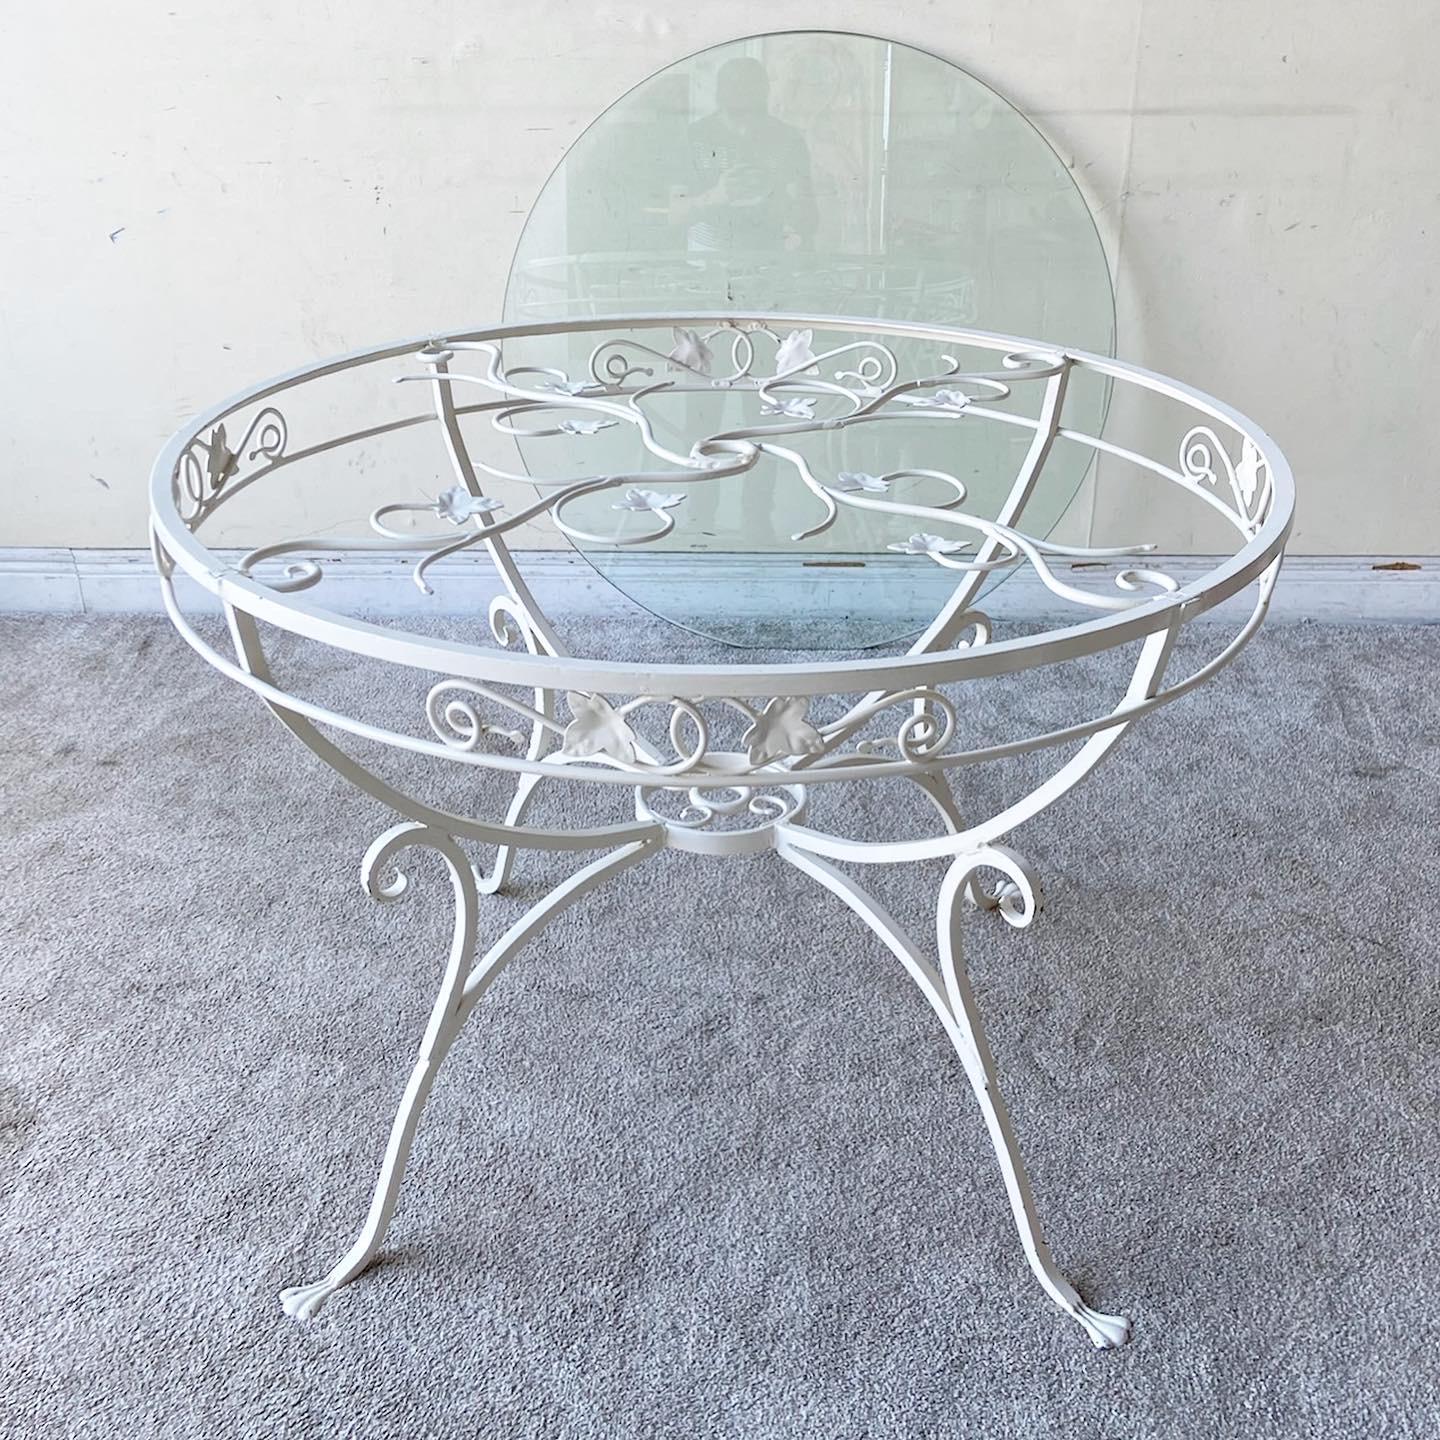 Vintage Wrought Iron Dining Table With Swivel Chairs - 3 Pieces In Good Condition In Delray Beach, FL